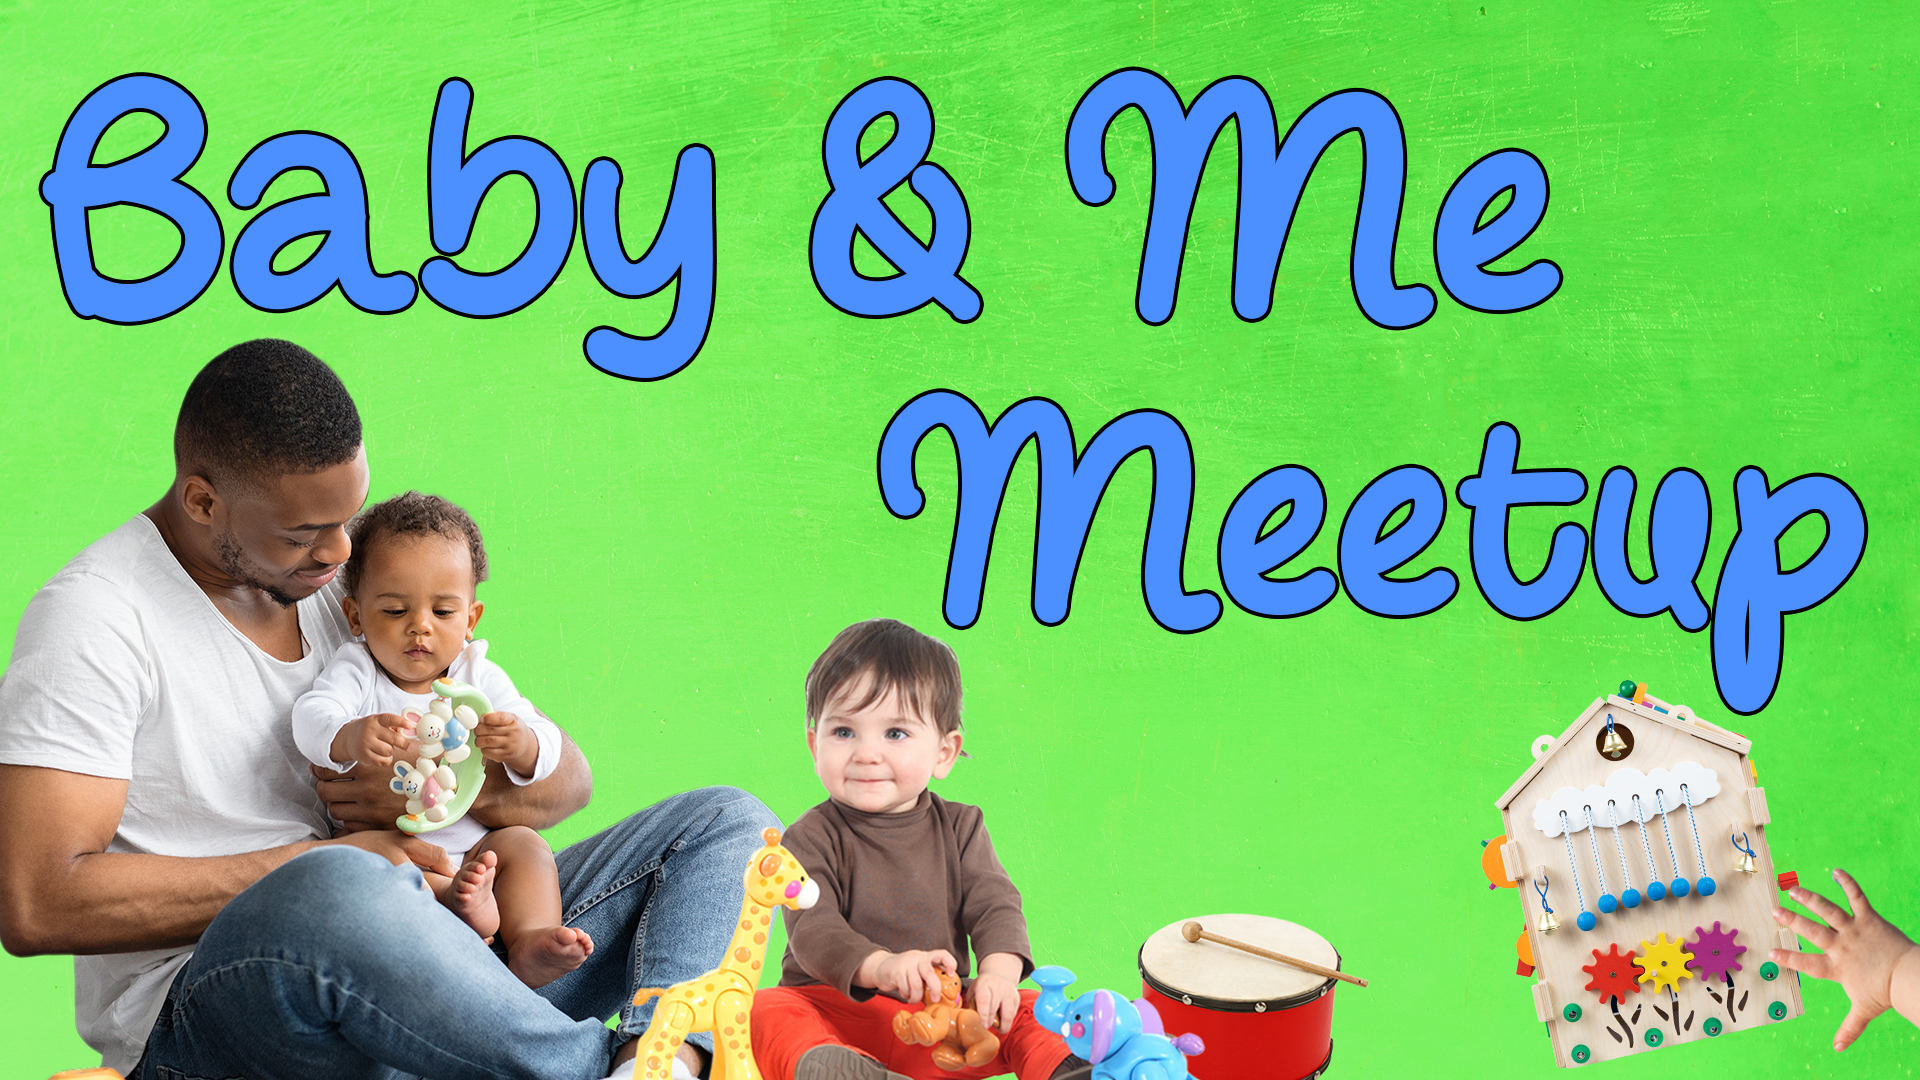 Image reads "Baby & Me Meetup" against a blue background. A man and a baby are under the title playing with toys. Another baby is under the title with more toys and a drum. A sensory board is in the bottom right corner.